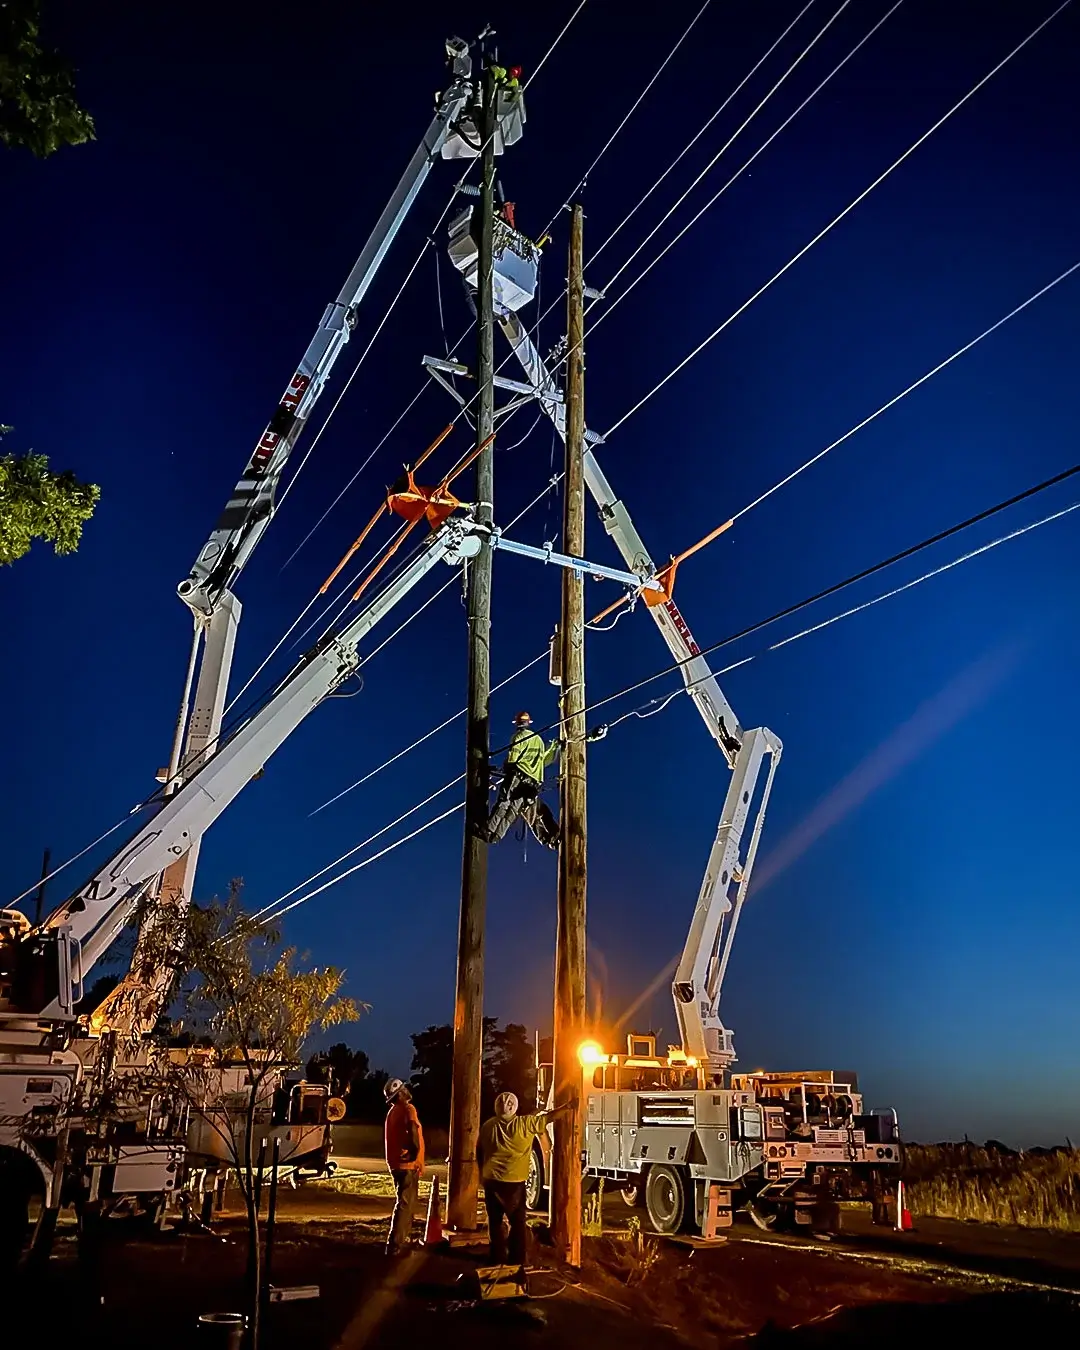 Crews from Michels Power, Inc. working on power lines at night.